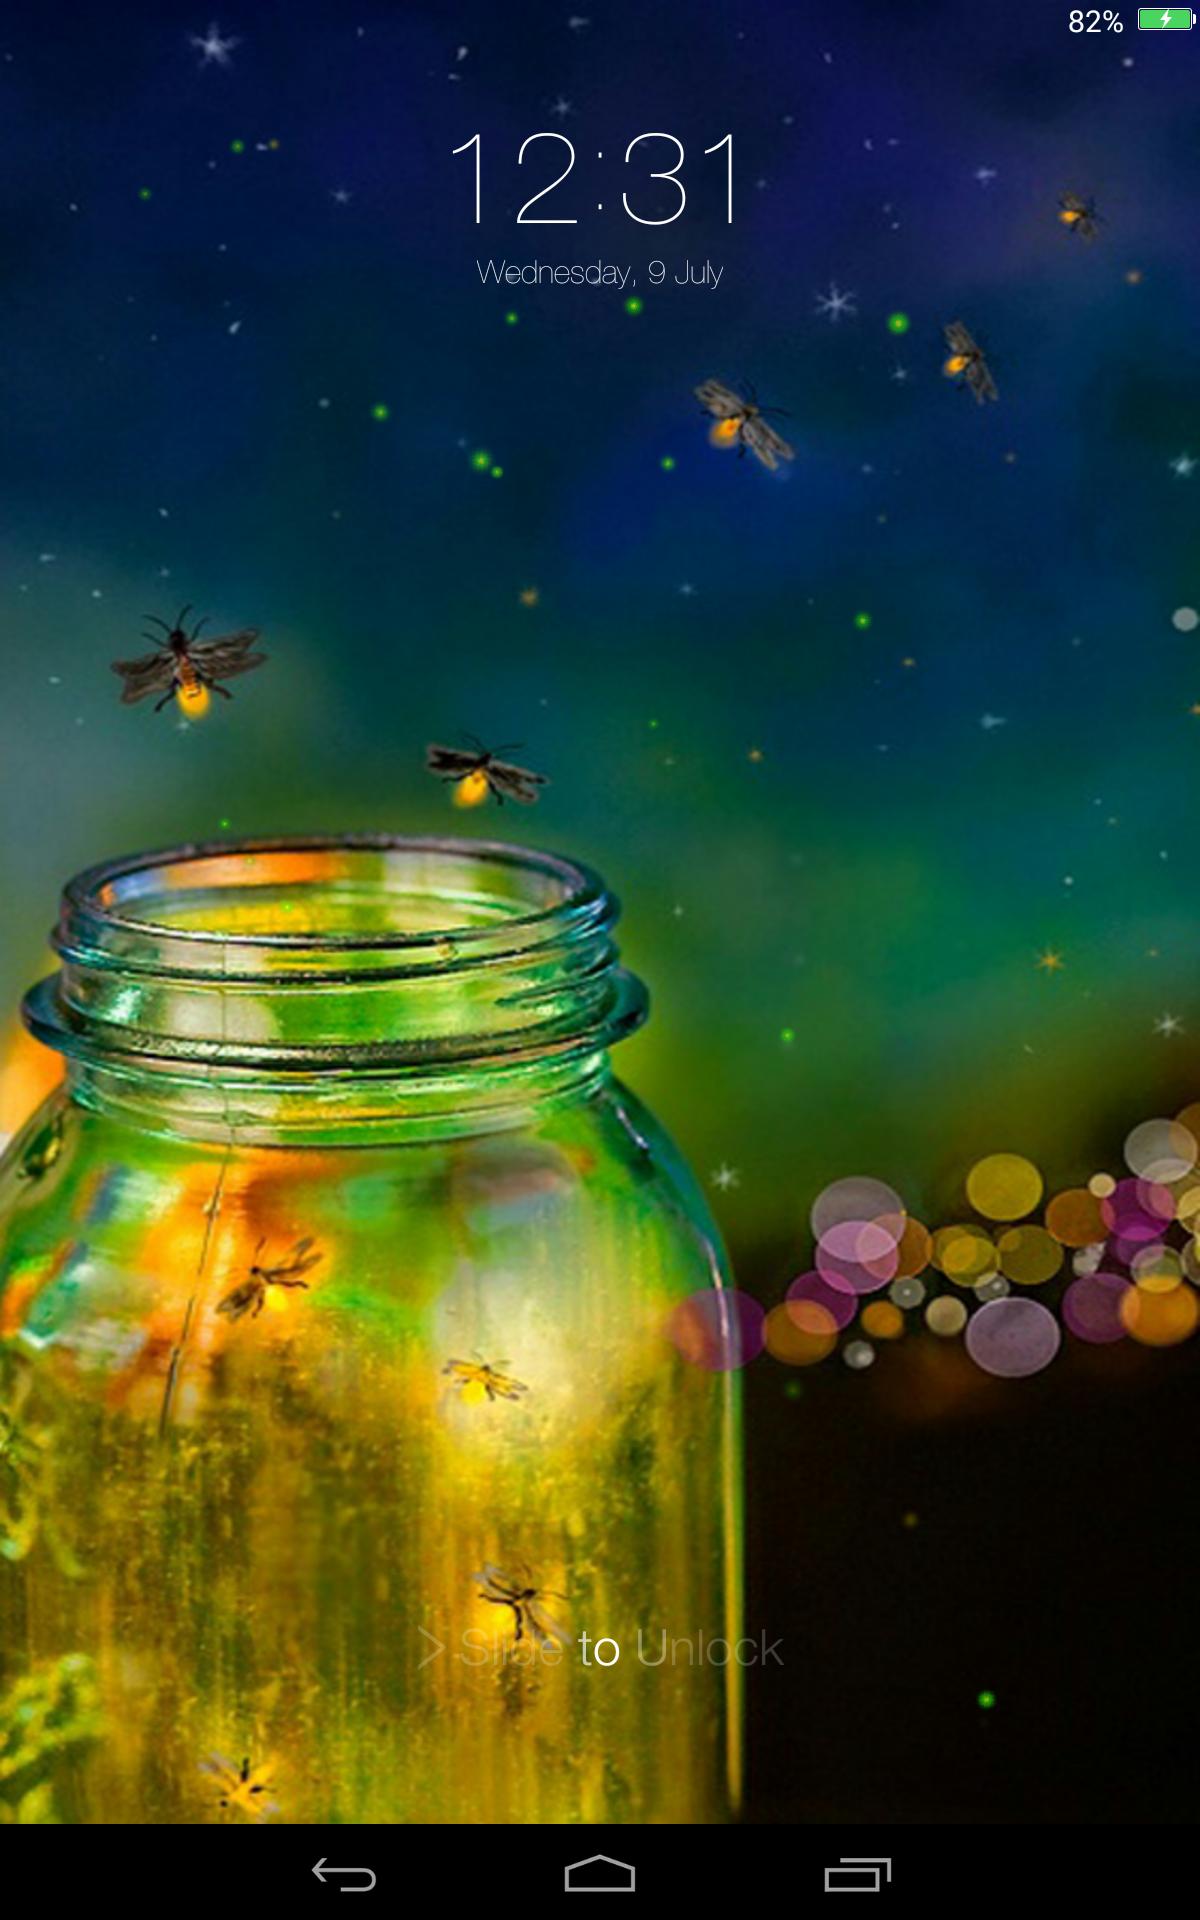 Firefly Live Lock Screen for Android - APK Download